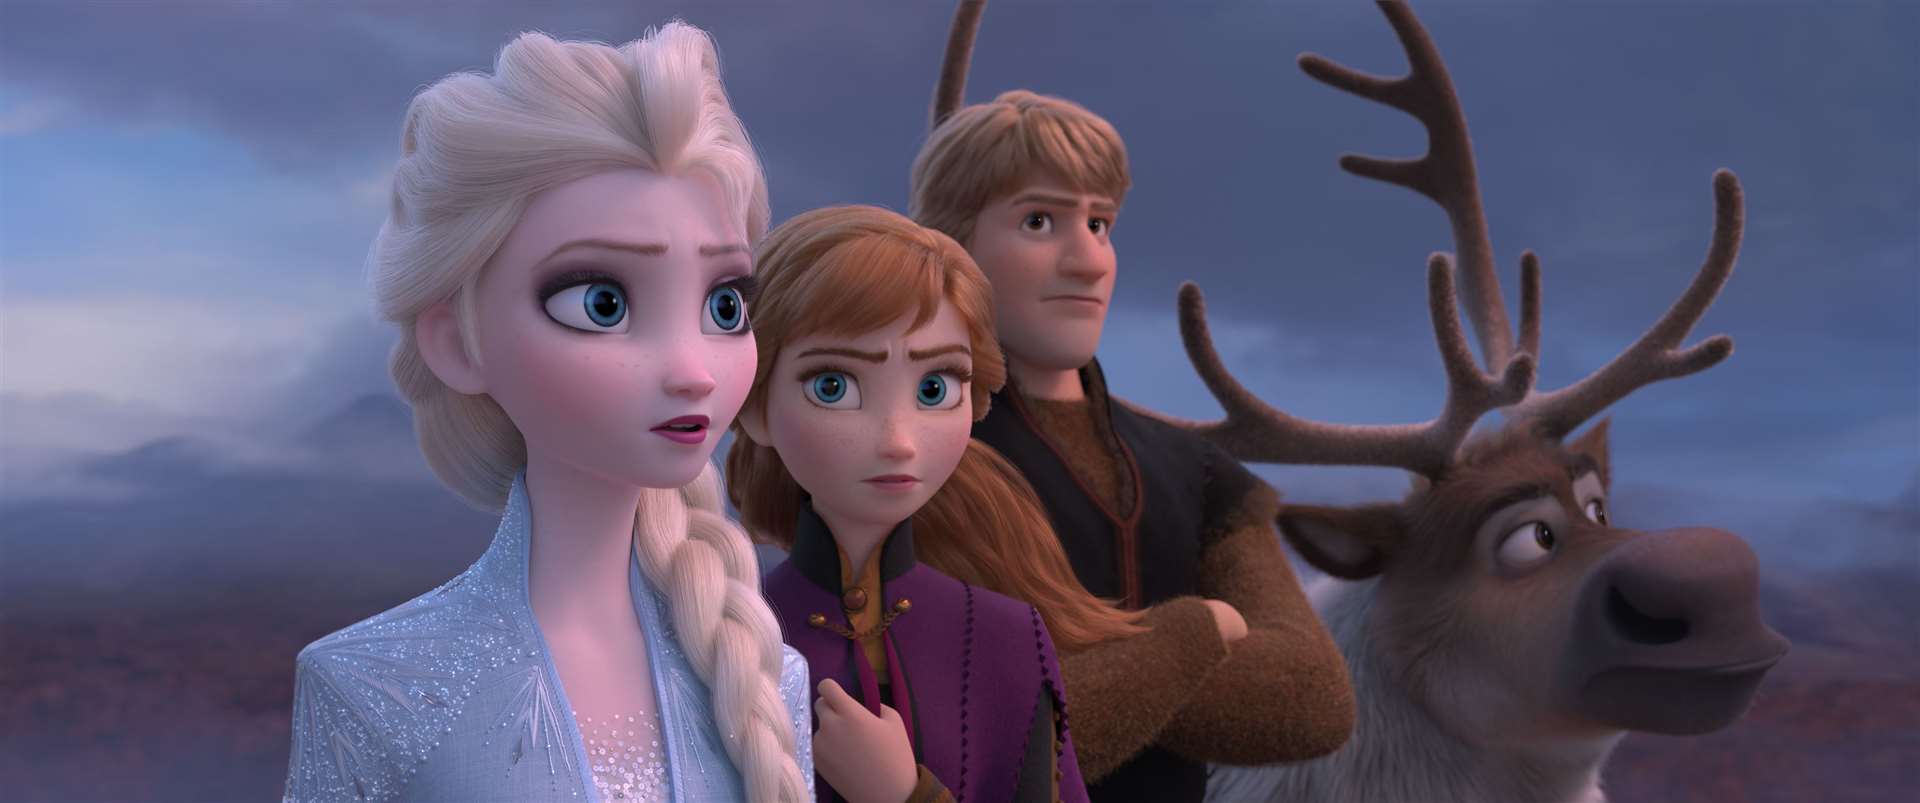 Elsa (voiced by Idina Menzel), Anna (Kristen Bell), Kristoff (Jonathan Groff) and Sven the reindeer are reunited for Frozen 2 Picture: Disney